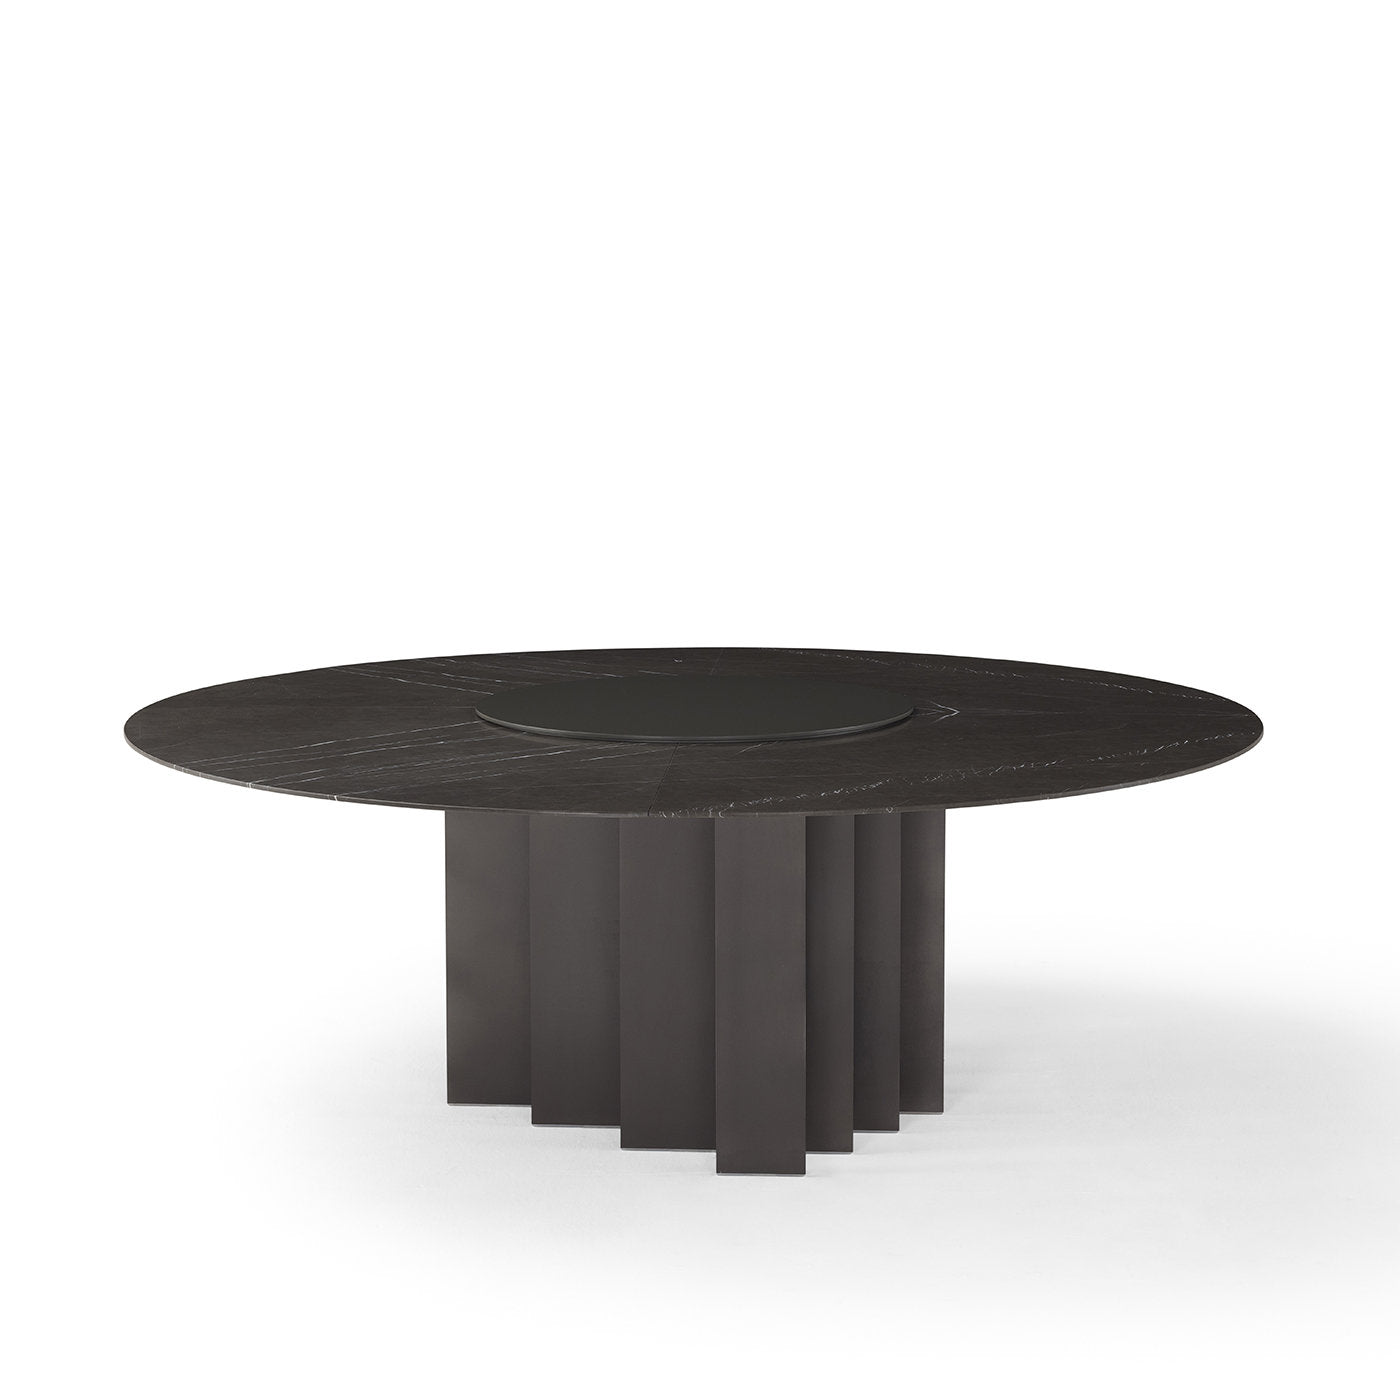 Exilis Round Dining Table - Alternative view 1